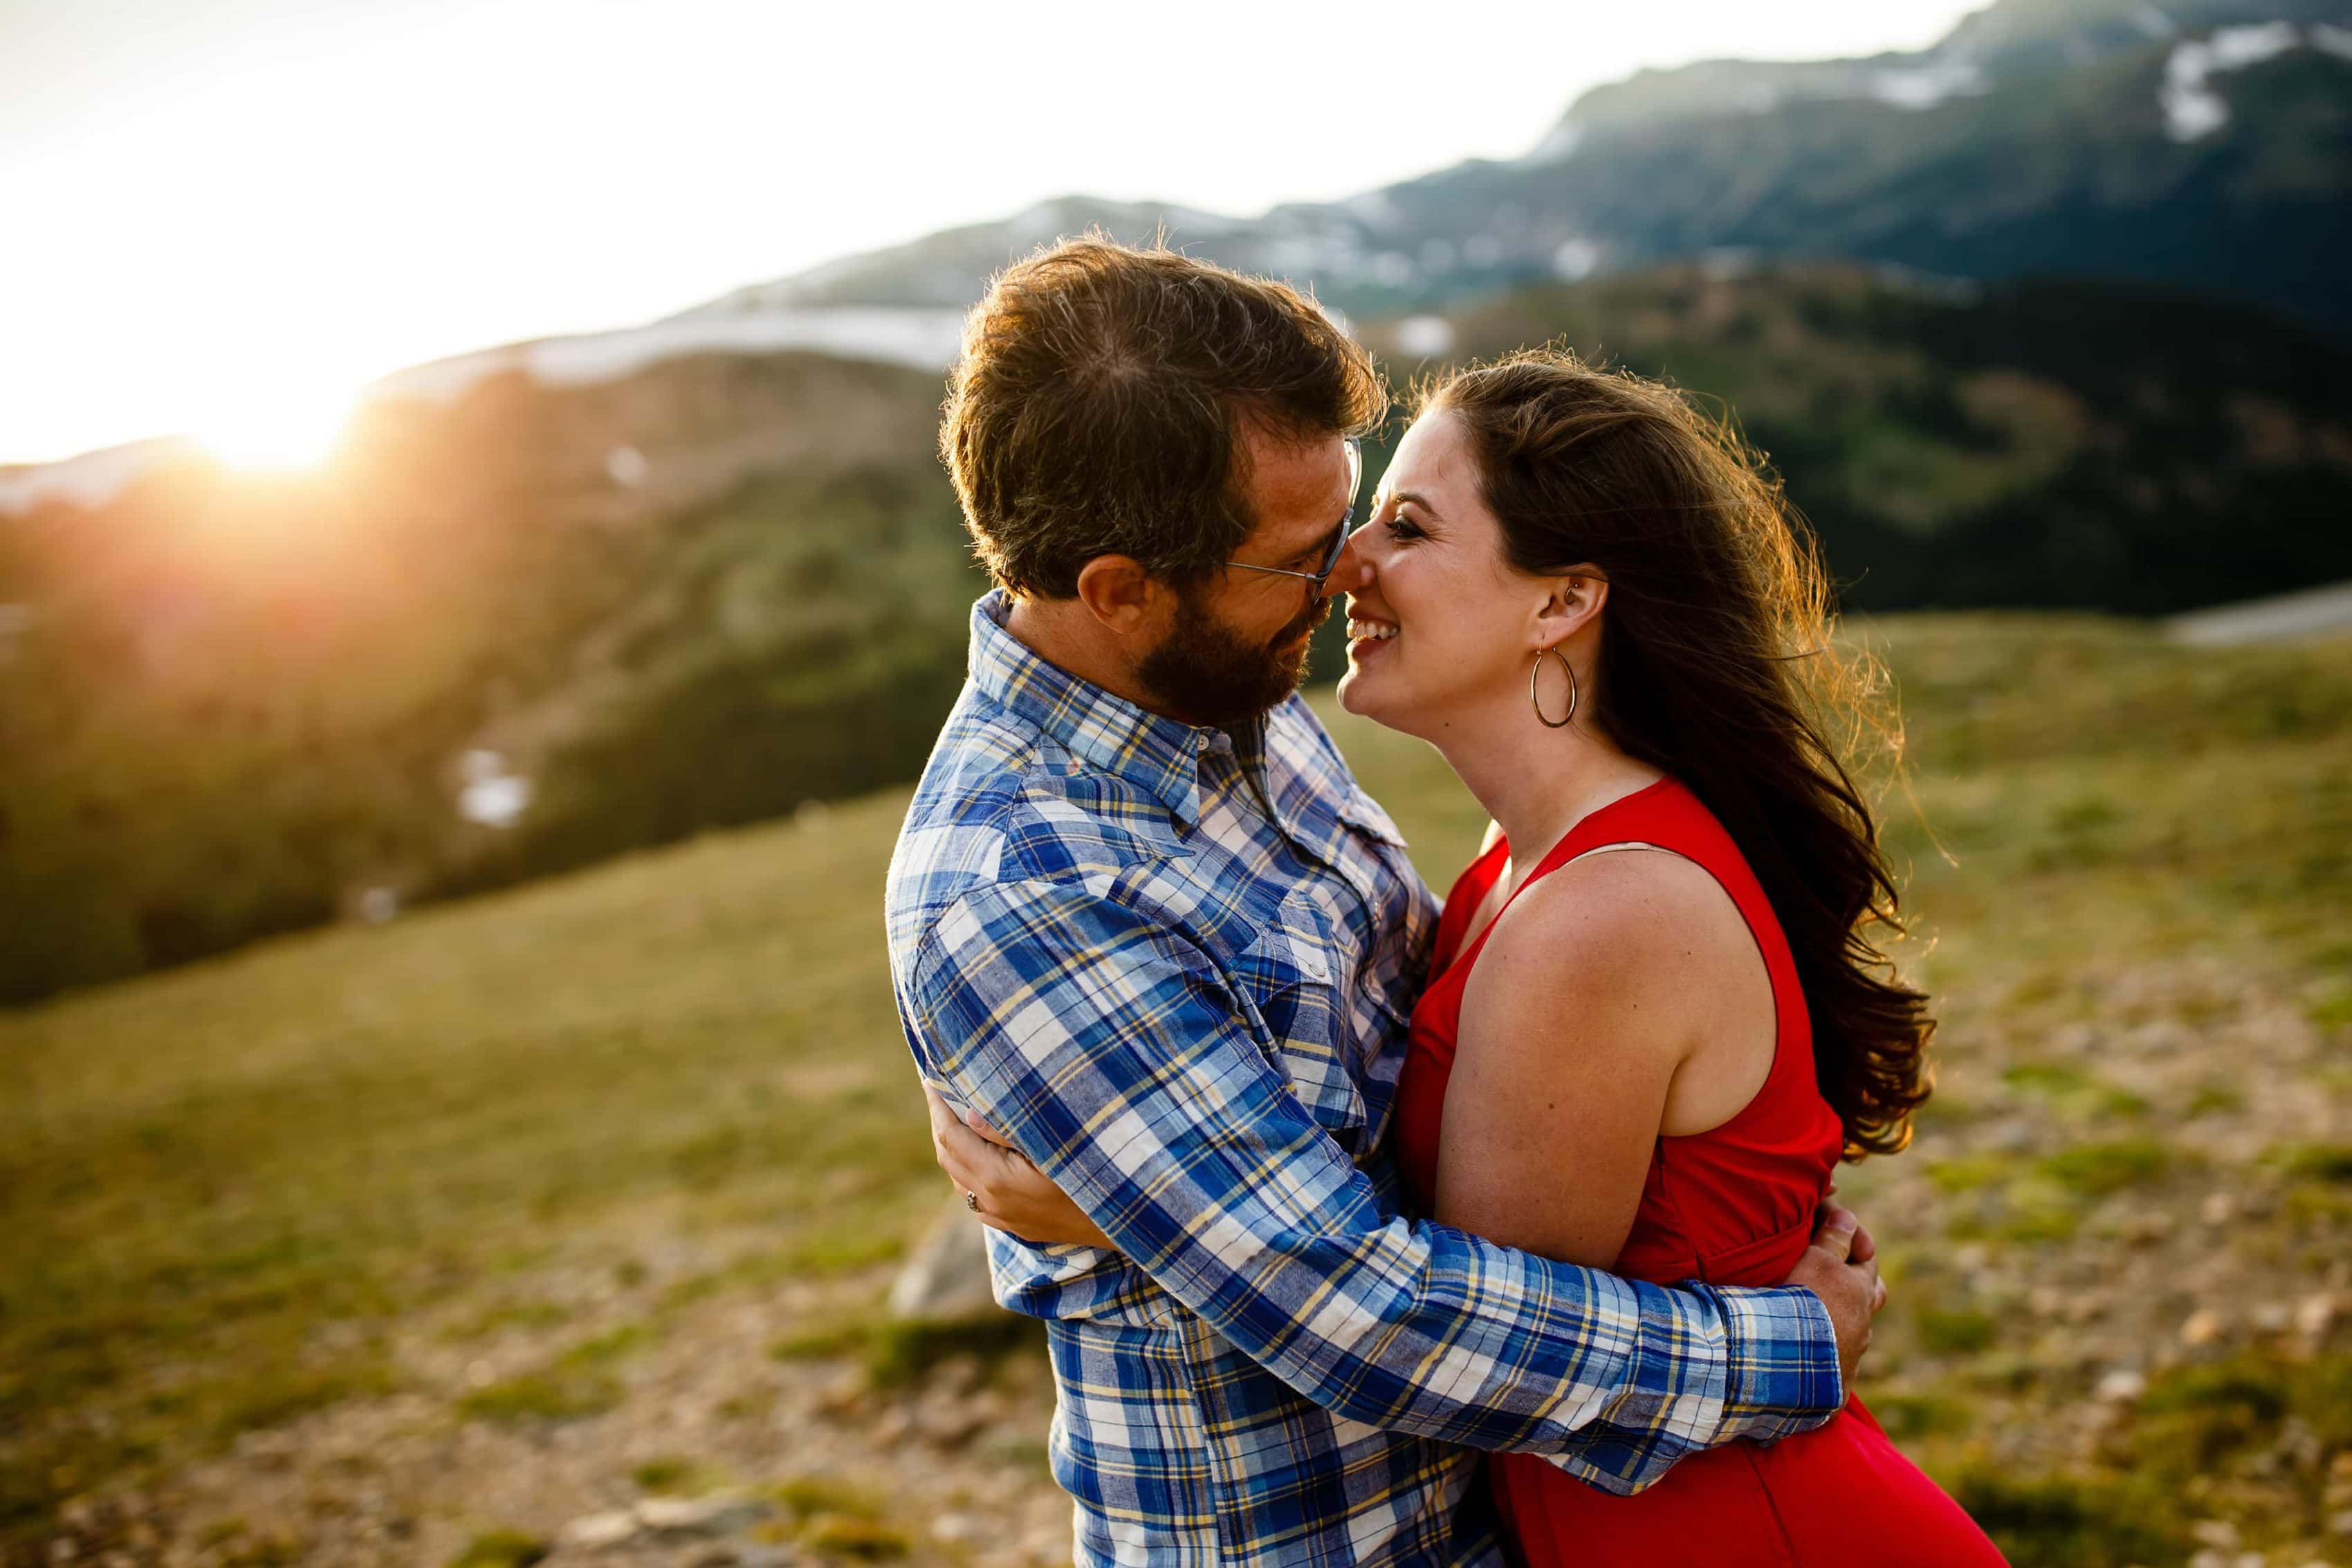 The sun sets behind Mallory and Daniel atop Loveland Pass in Colorado during their July engagment session